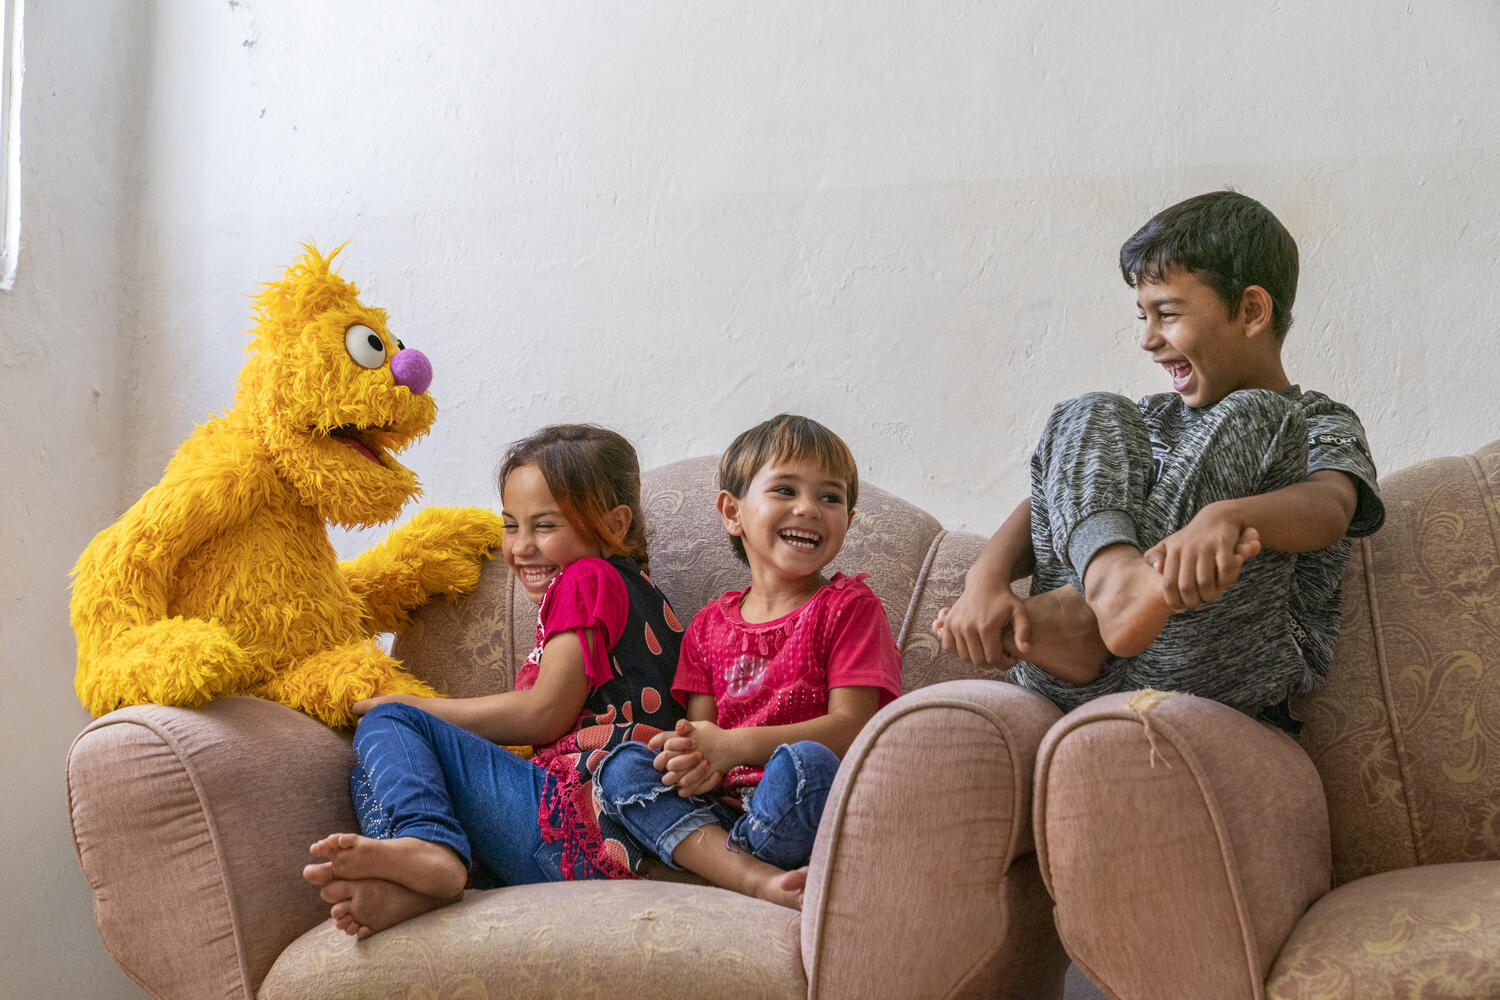 'Ahlan Simsim' features new Muppets with stories and experiences refugee children can relate to. Jad is a character who had to leave his home. 